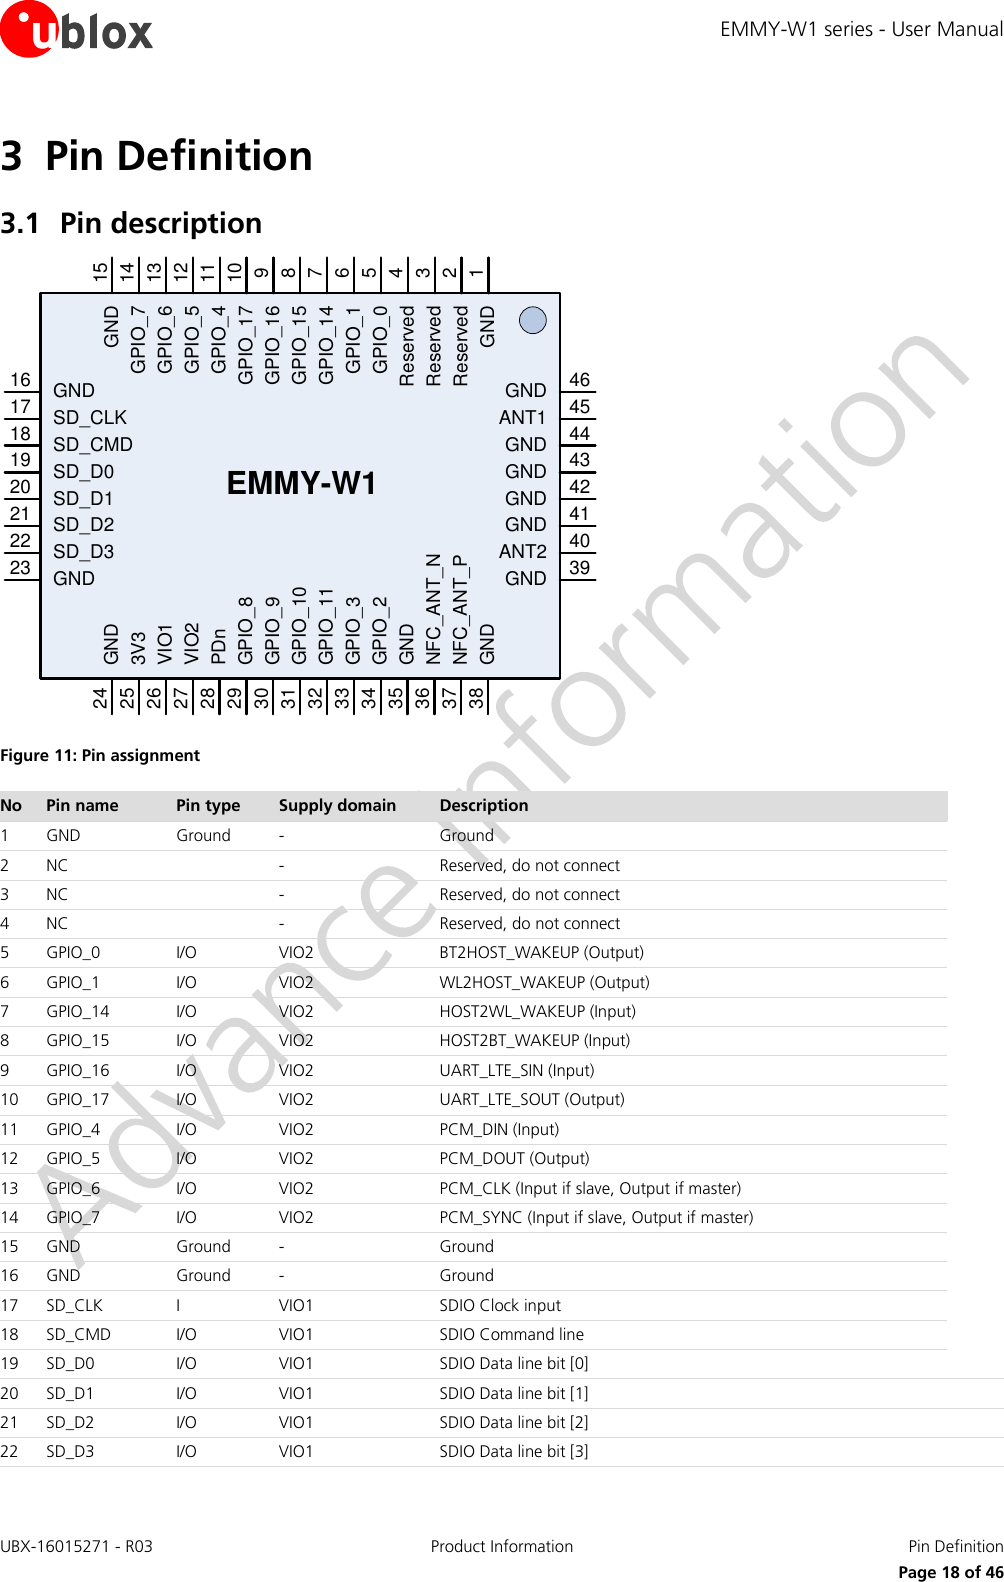 EMMY-W1 series - User Manual UBX-16015271 - R03 Product Information  Pin Definition     Page 18 of 46 3 Pin Definition 3.1 Pin description  Figure 11: Pin assignment No Pin name Pin type Supply domain Description 1 GND Ground - Ground 2 NC  - Reserved, do not connect 3 NC  - Reserved, do not connect 4 NC  - Reserved, do not connect 5 GPIO_0 I/O VIO2 BT2HOST_WAKEUP (Output) 6 GPIO_1 I/O VIO2 WL2HOST_WAKEUP (Output) 7 GPIO_14 I/O VIO2 HOST2WL_WAKEUP (Input) 8 GPIO_15 I/O VIO2 HOST2BT_WAKEUP (Input) 9 GPIO_16 I/O VIO2 UART_LTE_SIN (Input) 10 GPIO_17 I/O VIO2 UART_LTE_SOUT (Output) 11 GPIO_4 I/O VIO2 PCM_DIN (Input) 12 GPIO_5 I/O VIO2 PCM_DOUT (Output) 13 GPIO_6 I/O VIO2 PCM_CLK (Input if slave, Output if master) 14 GPIO_7 I/O VIO2 PCM_SYNC (Input if slave, Output if master) 15 GND Ground - Ground 16 GND Ground - Ground 17 SD_CLK I VIO1 SDIO Clock input 18 SD_CMD I/O VIO1 SDIO Command line 19 SD_D0 I/O VIO1 SDIO Data line bit [0] 20 SD_D1 I/O VIO1 SDIO Data line bit [1] 21 SD_D2 I/O VIO1 SDIO Data line bit [2] 22 SD_D3 I/O VIO1 SDIO Data line bit [3] GNDEMMY-W1SD_CLKSD_CMDSD_D0SD_D1SD_D2SD_D3GNDGND3V3VIO1VIO2PDnGPIO_8GPIO_9GPIO_1029303125262728244645444342414039GNDANT2GNDGNDGNDGNDANT1GND654321GNDReservedReservedReservedGPIO_0GPIO_17GPIO_148GPIO_159GPIO_1610GPIO_1711GPIO_412GPIO_513GPIO_614GPIO_715GND1617181920212223GPIO_1132GPIO_333GPIO_234GND35NFC_ANT_N36NFC_ANT_P37GND38   